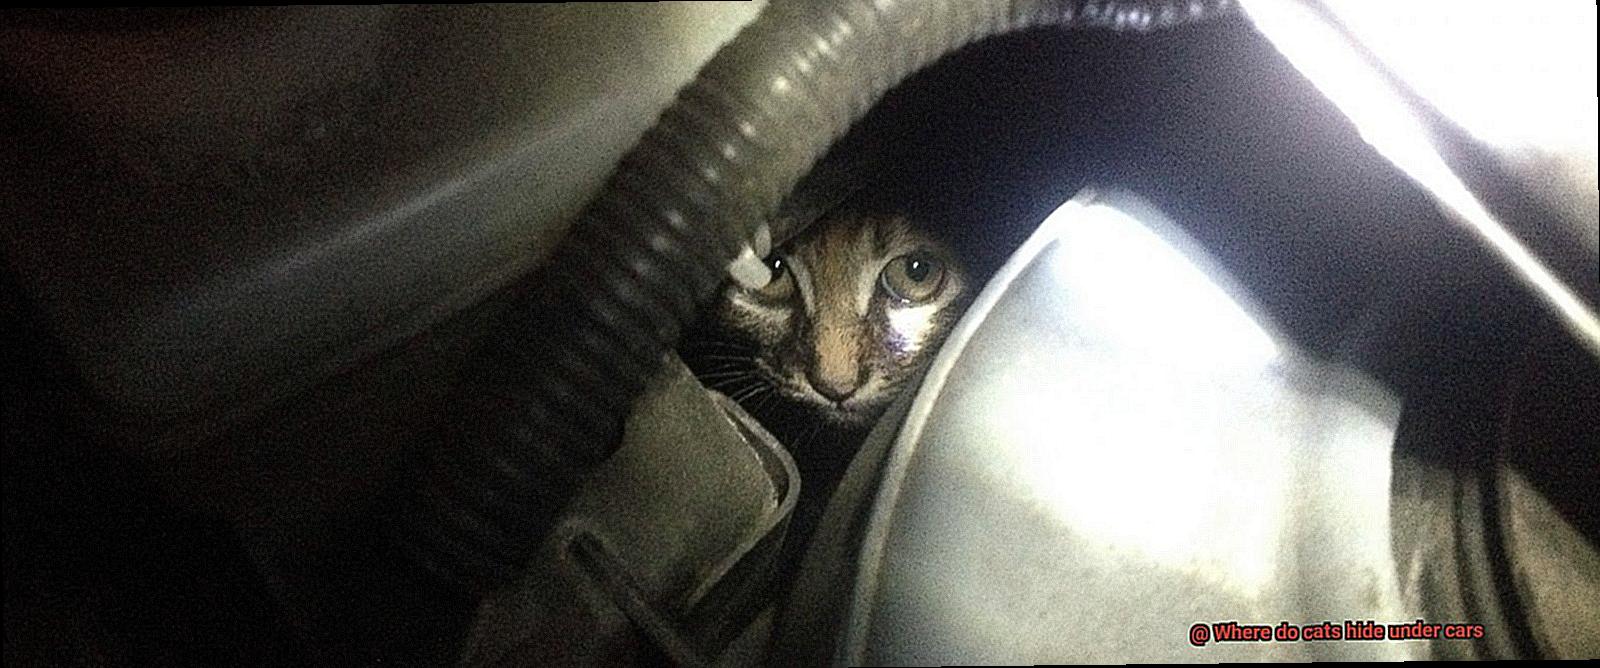 Where do cats hide under cars-4